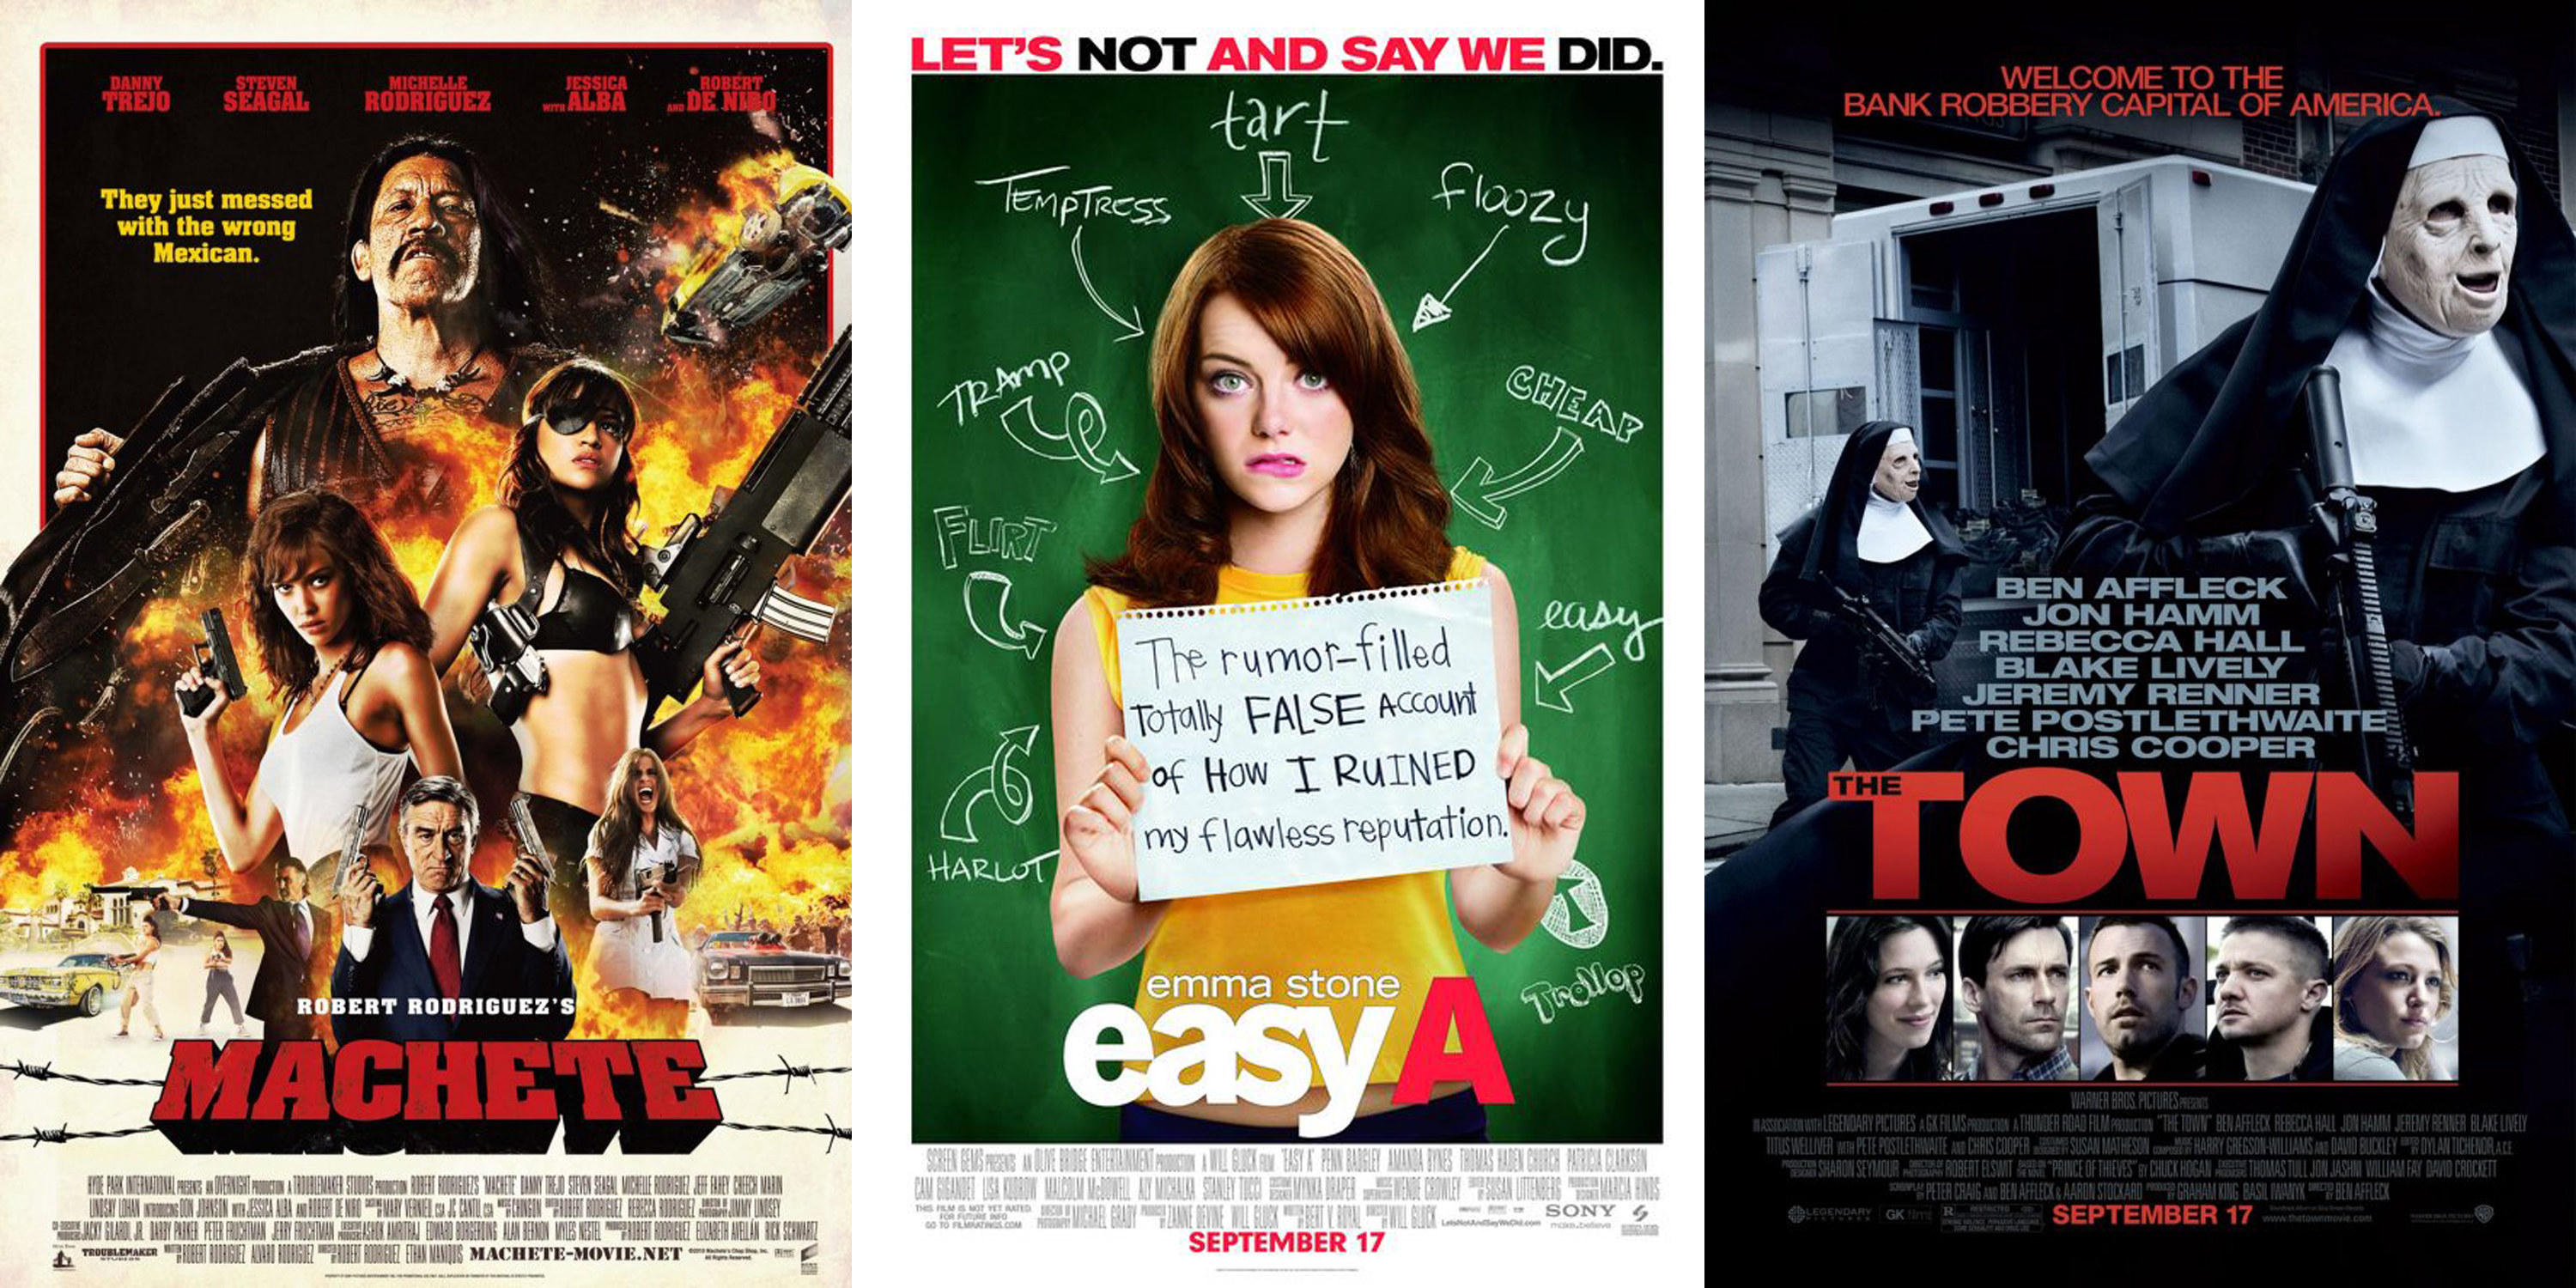 The movie poster for Matchete, Easy A, and The Town